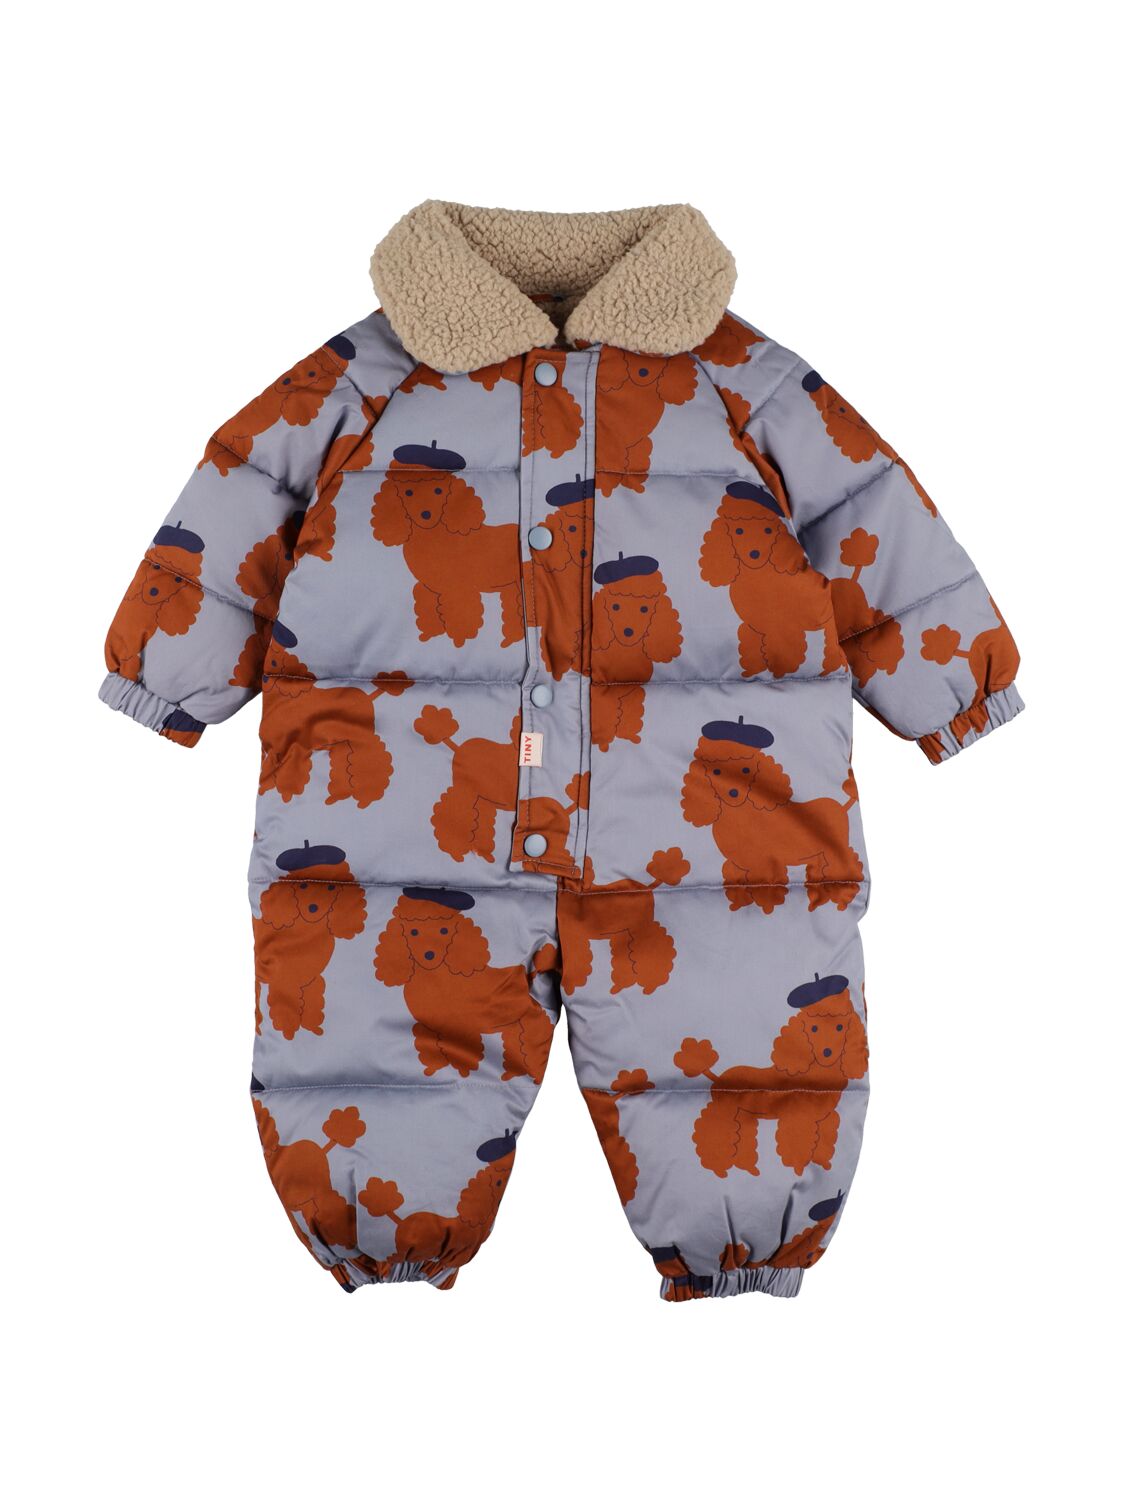 Tiny Cottons Babies' Poodle印花尼龙蓬松连体衣 In Blue,brown